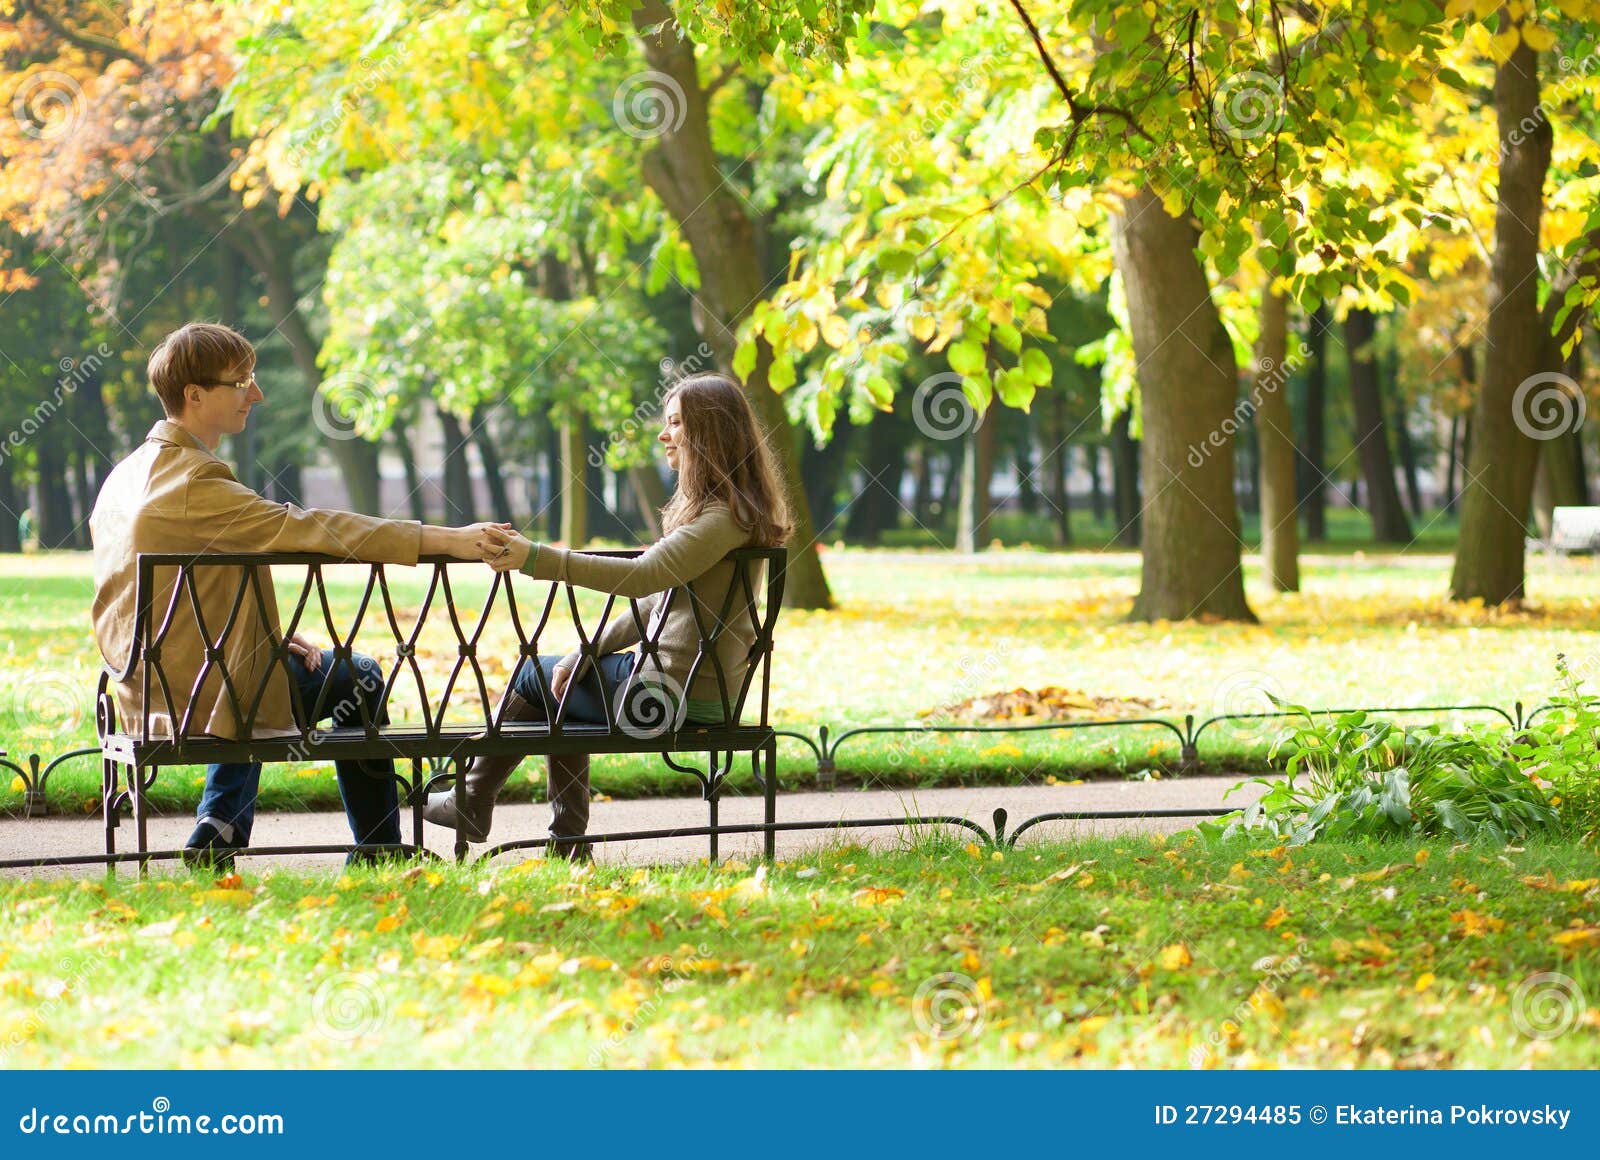 benches online dating